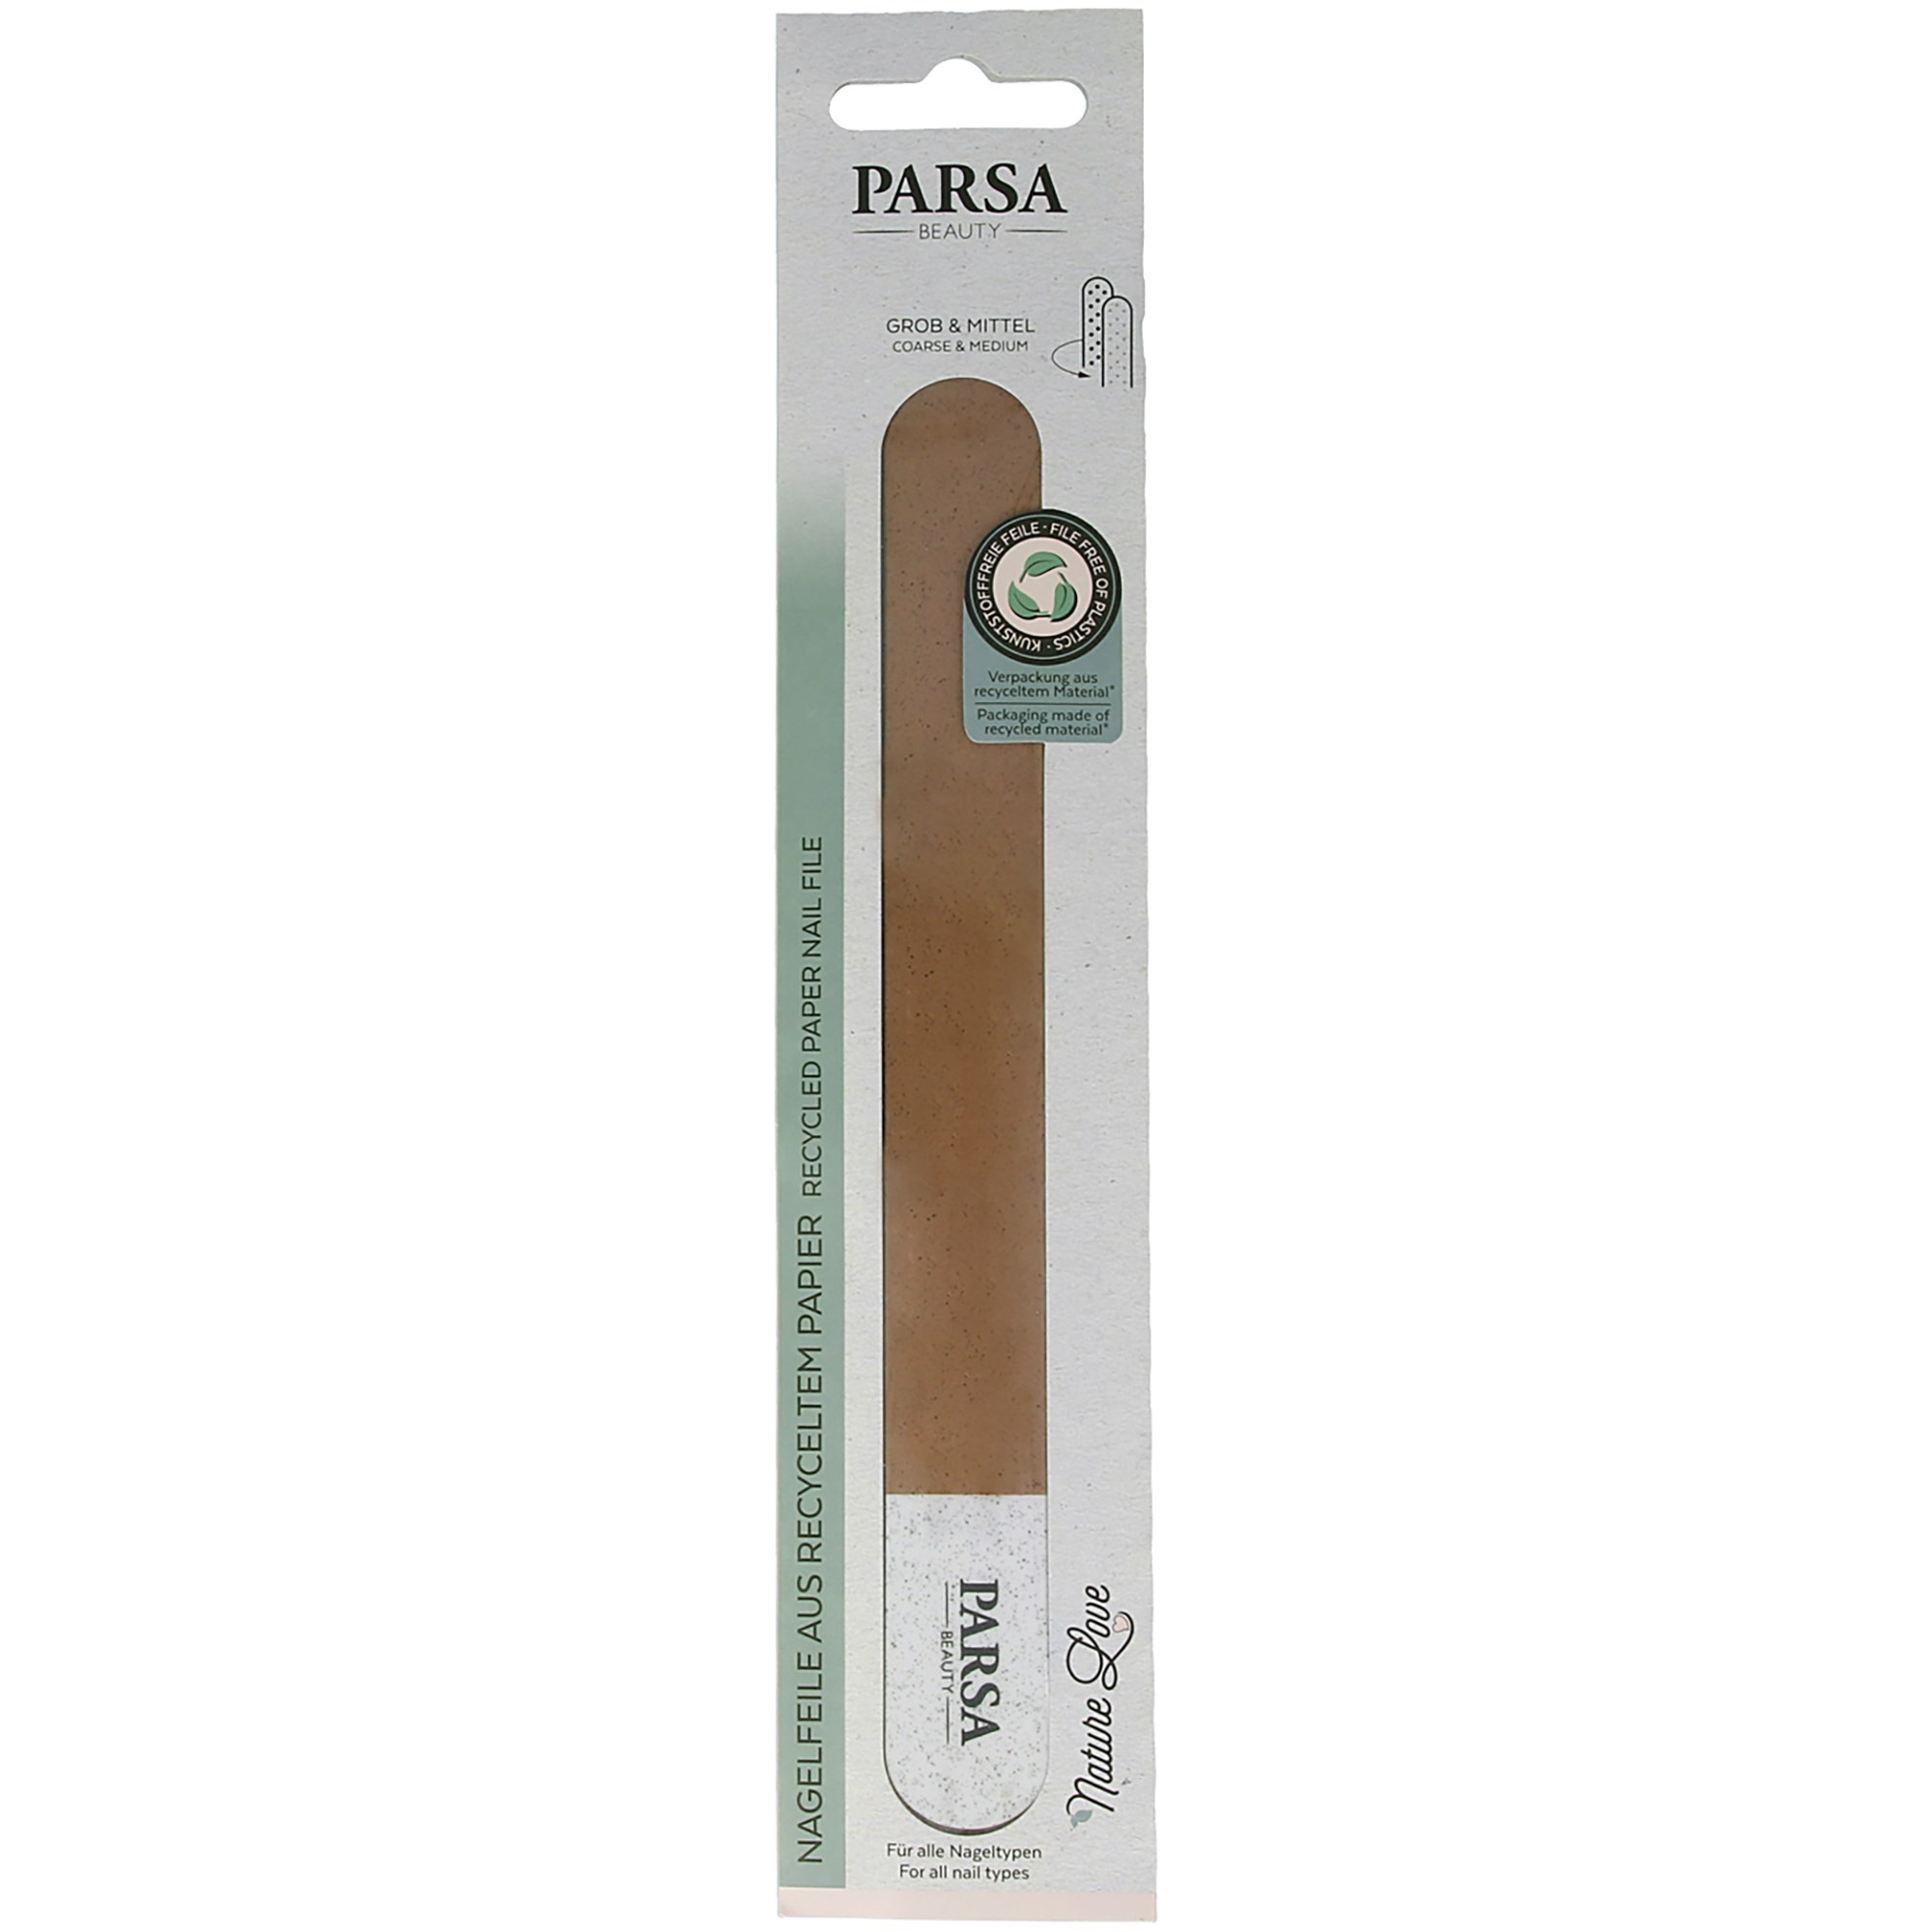 Parsa Beauty Nature Love Nail File Made From Recycled Paper